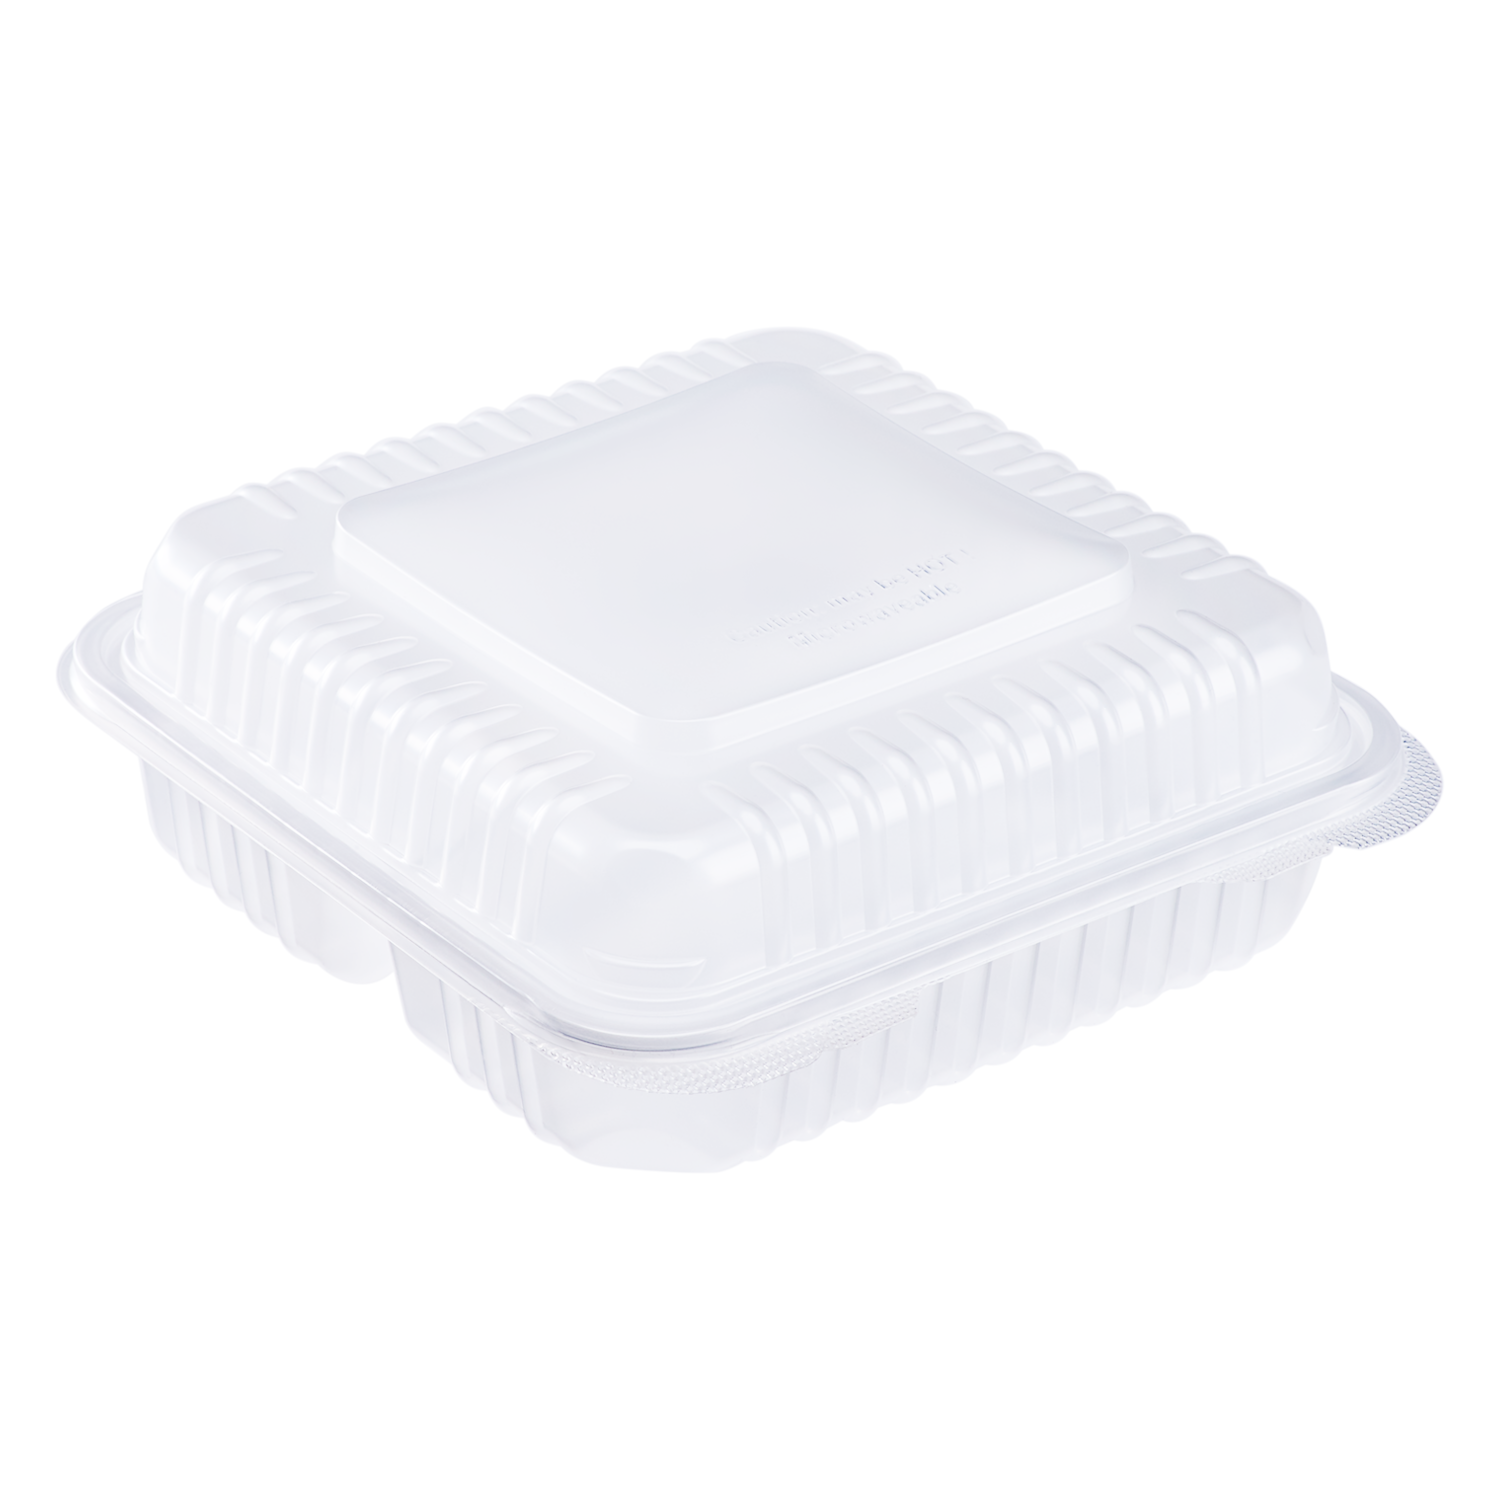 35pcs Clamshell Take Out Tray Plastic Hinged Food Containers Disposable  Takeout Box